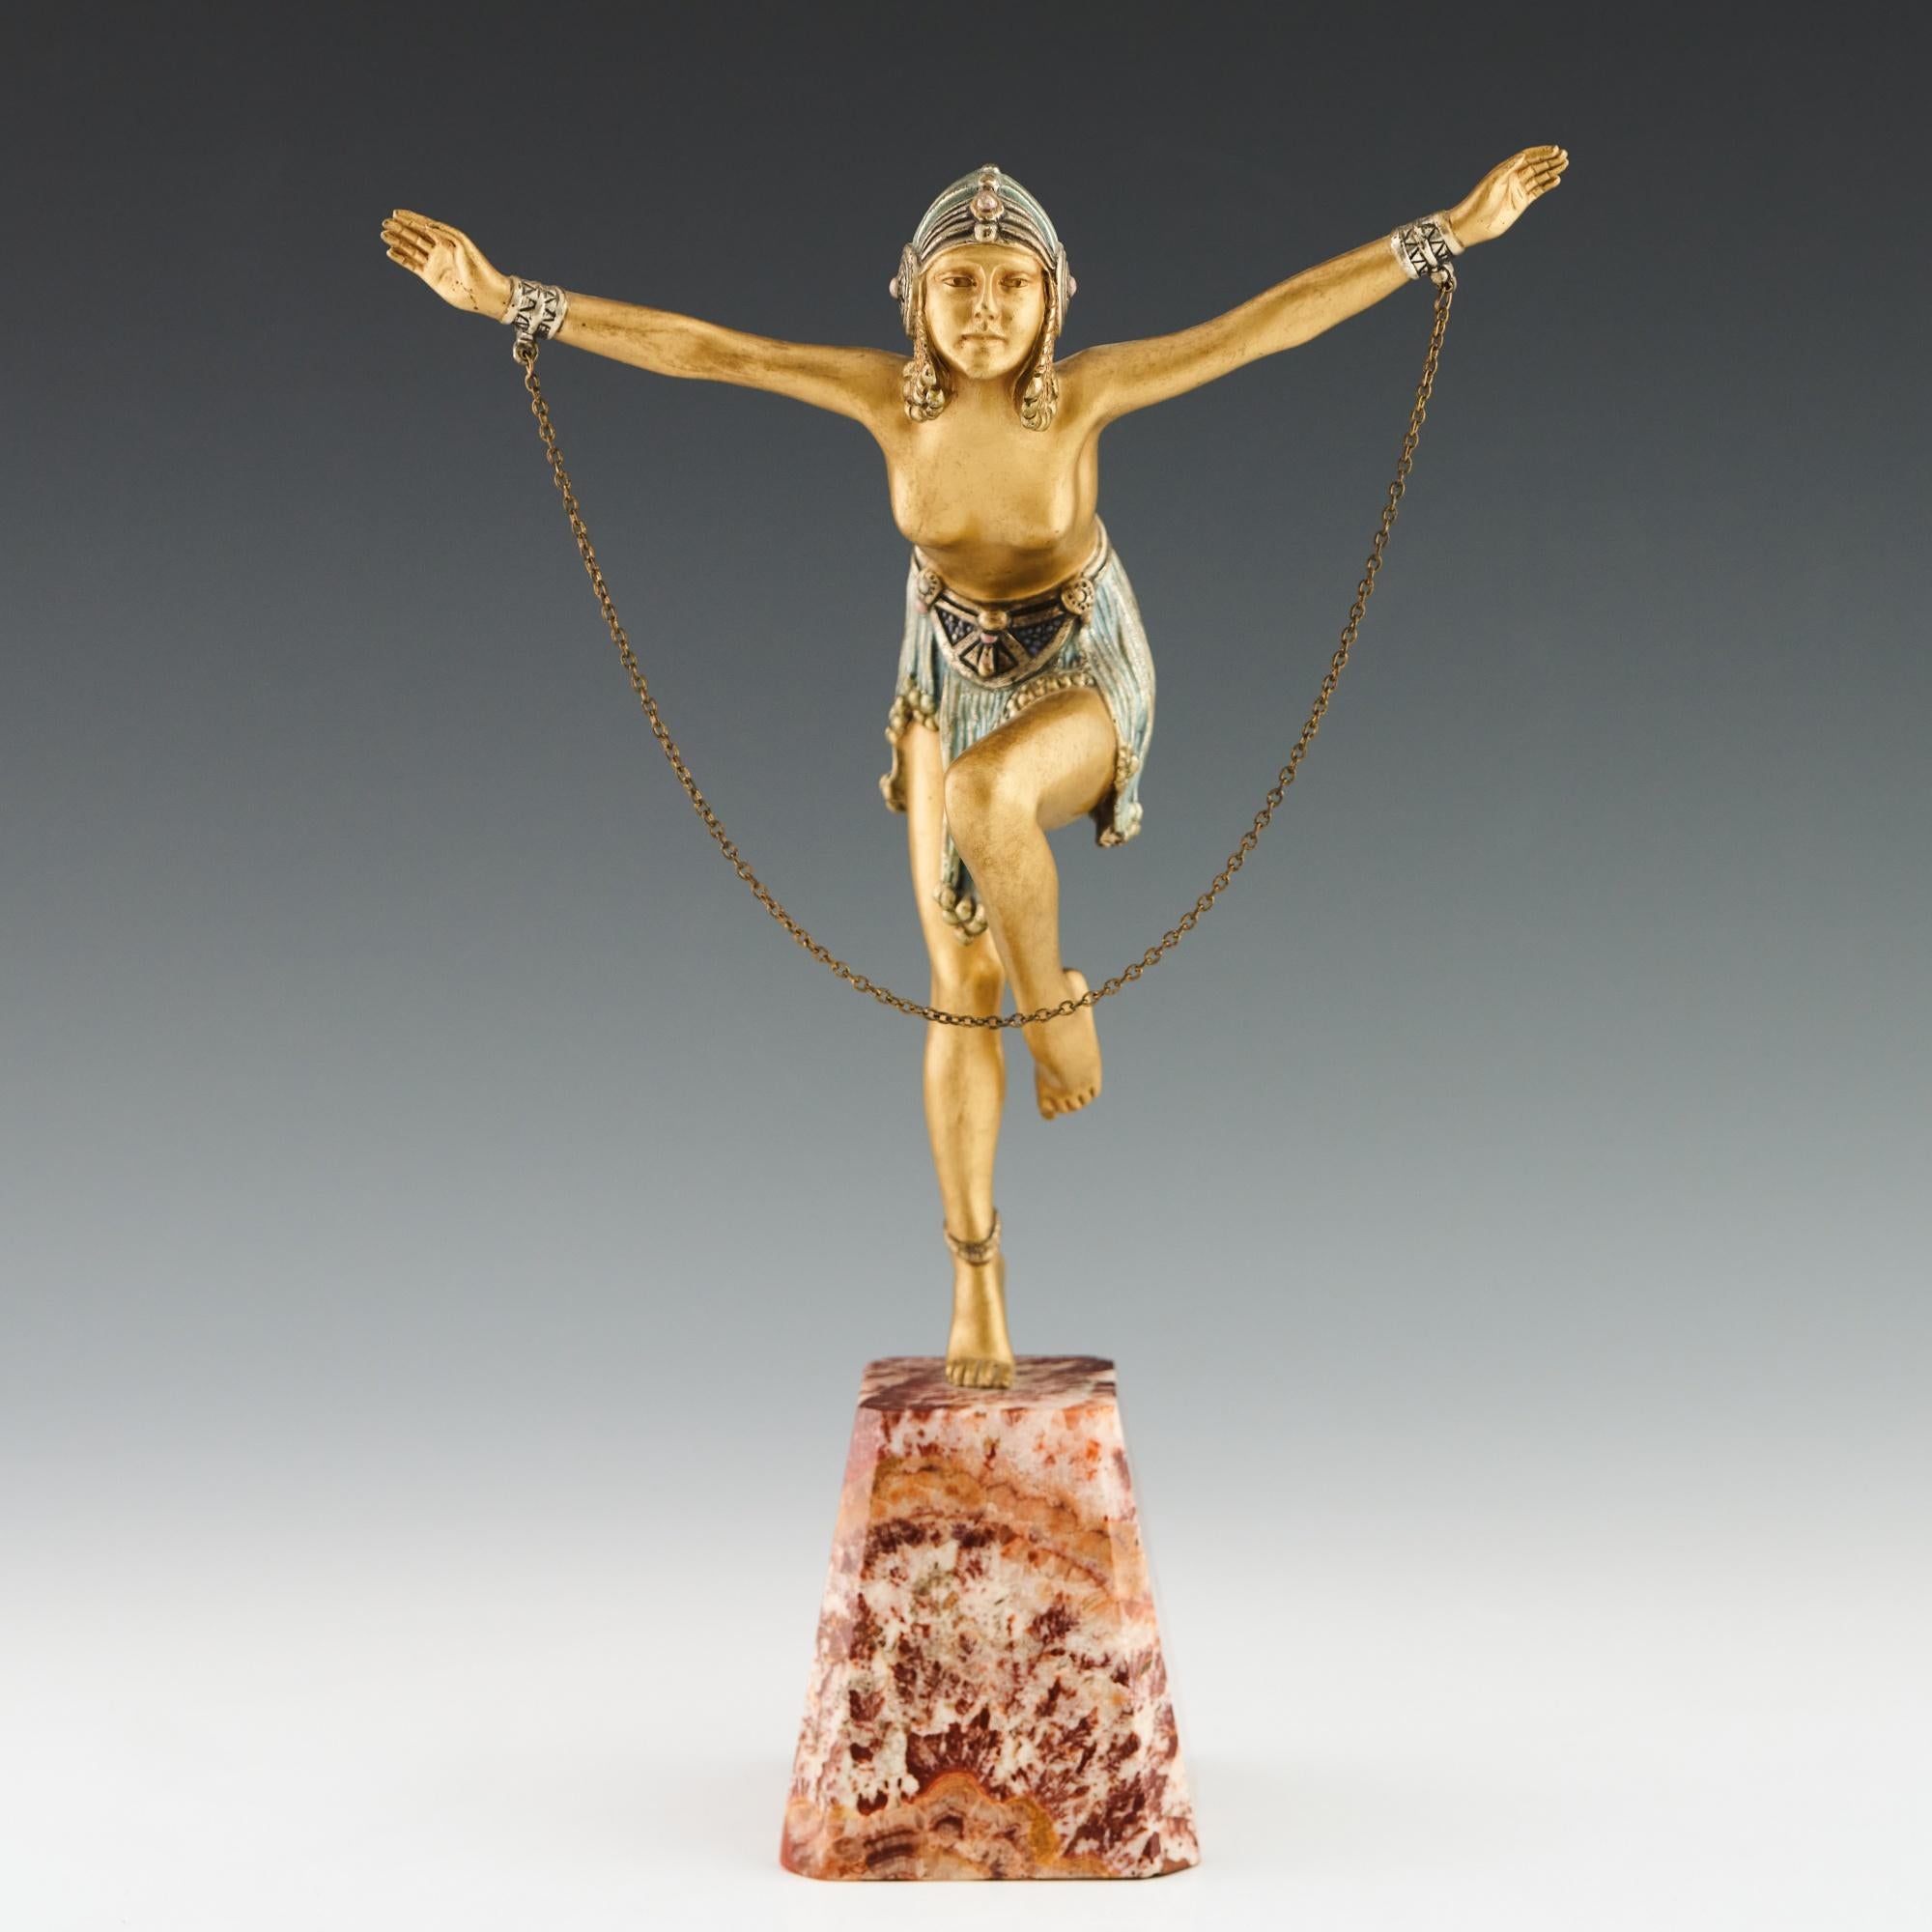 'A Dancer' an Art Deco cold painted gilt bronze figure by Demetre Chiparus (1886-1947). An athletic dancer dressed in scantily clad theatrical costume with arms outstretched in a stylised pose with chain connected to both arms. Excellent hand